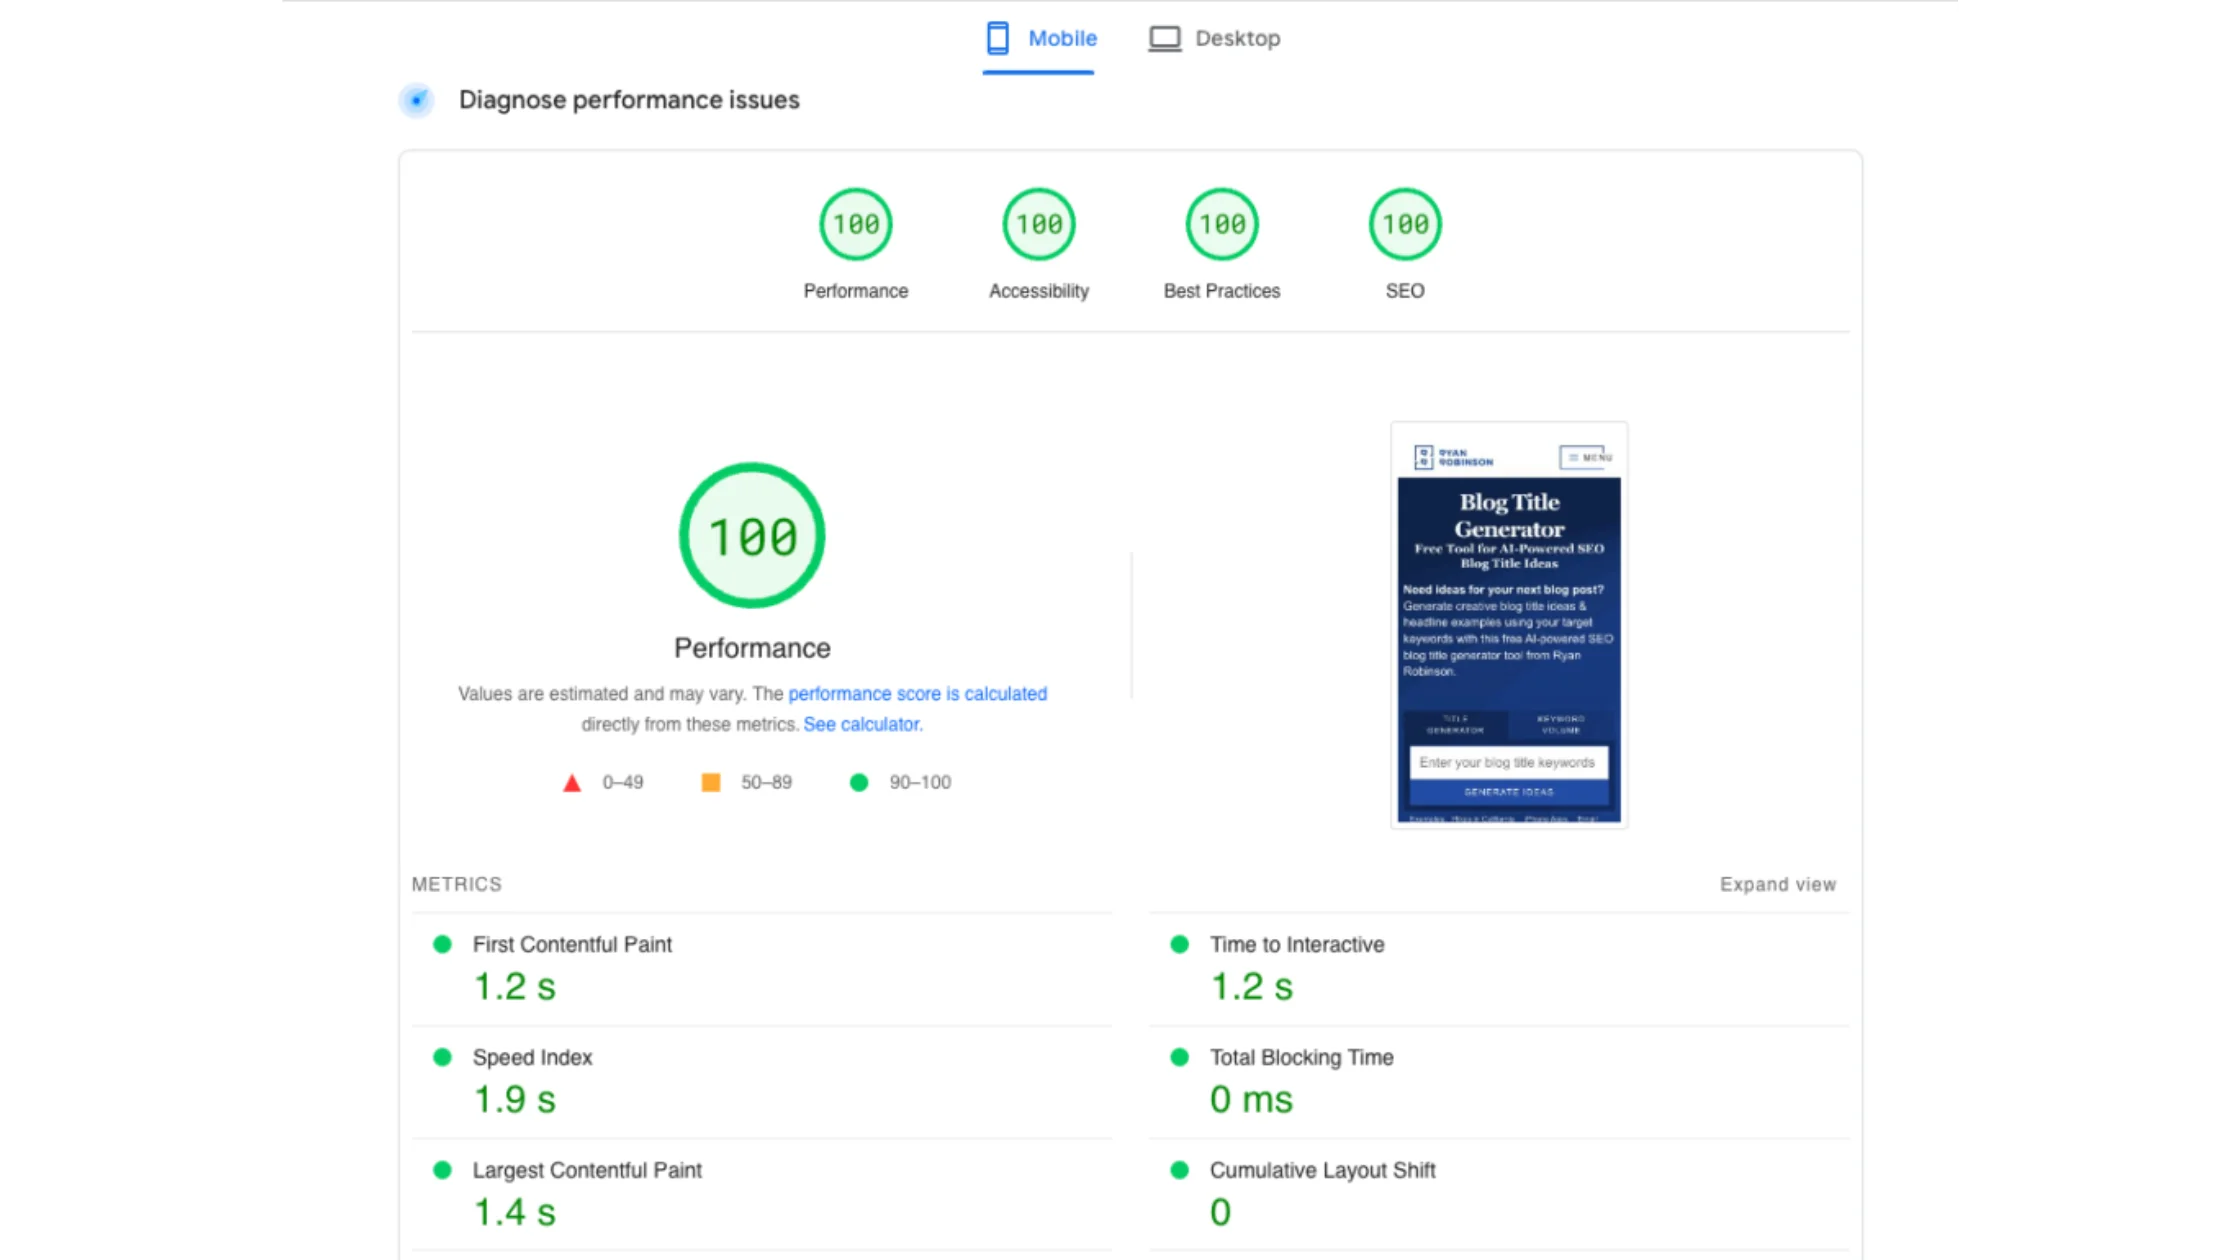 Screenshot of Google Page Speed Insight Test Results